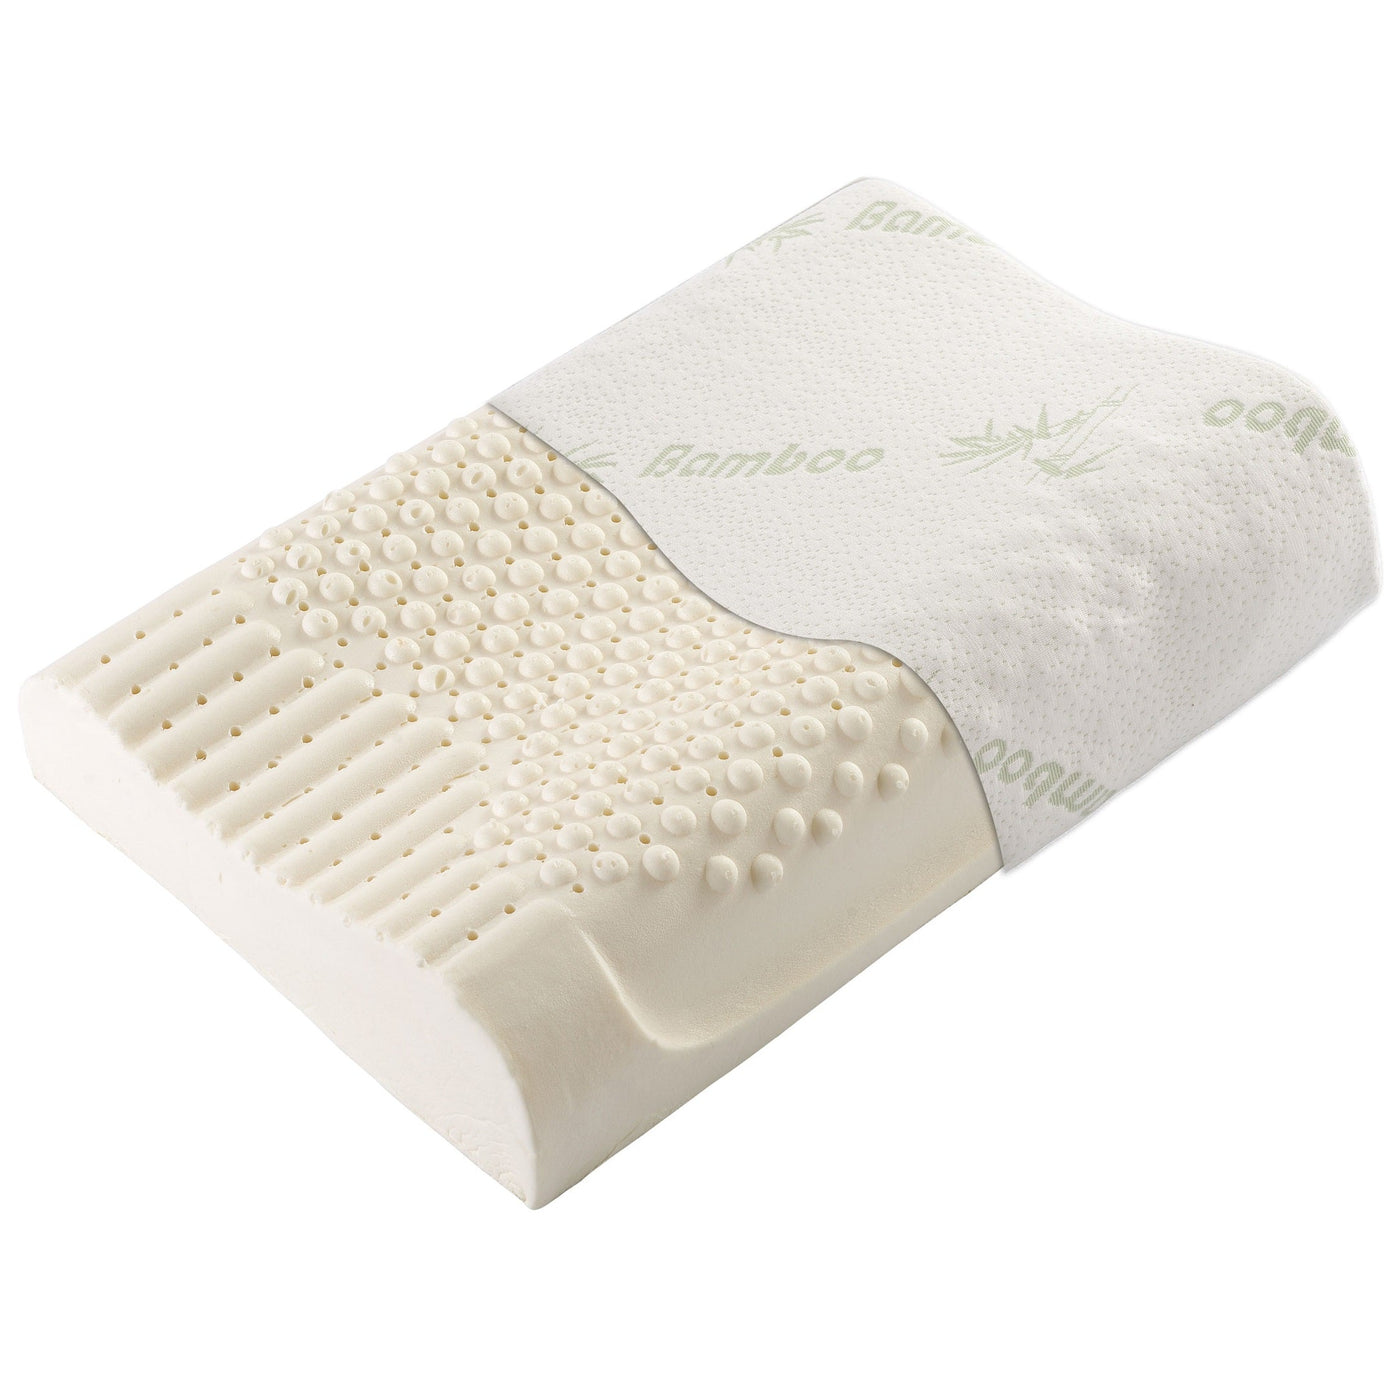 https://www.cheercollection.com/cdn/shop/products/cheer-collection-contoured-latex-memory-foam-pillow-770271_1400x.jpg?v=1671781157